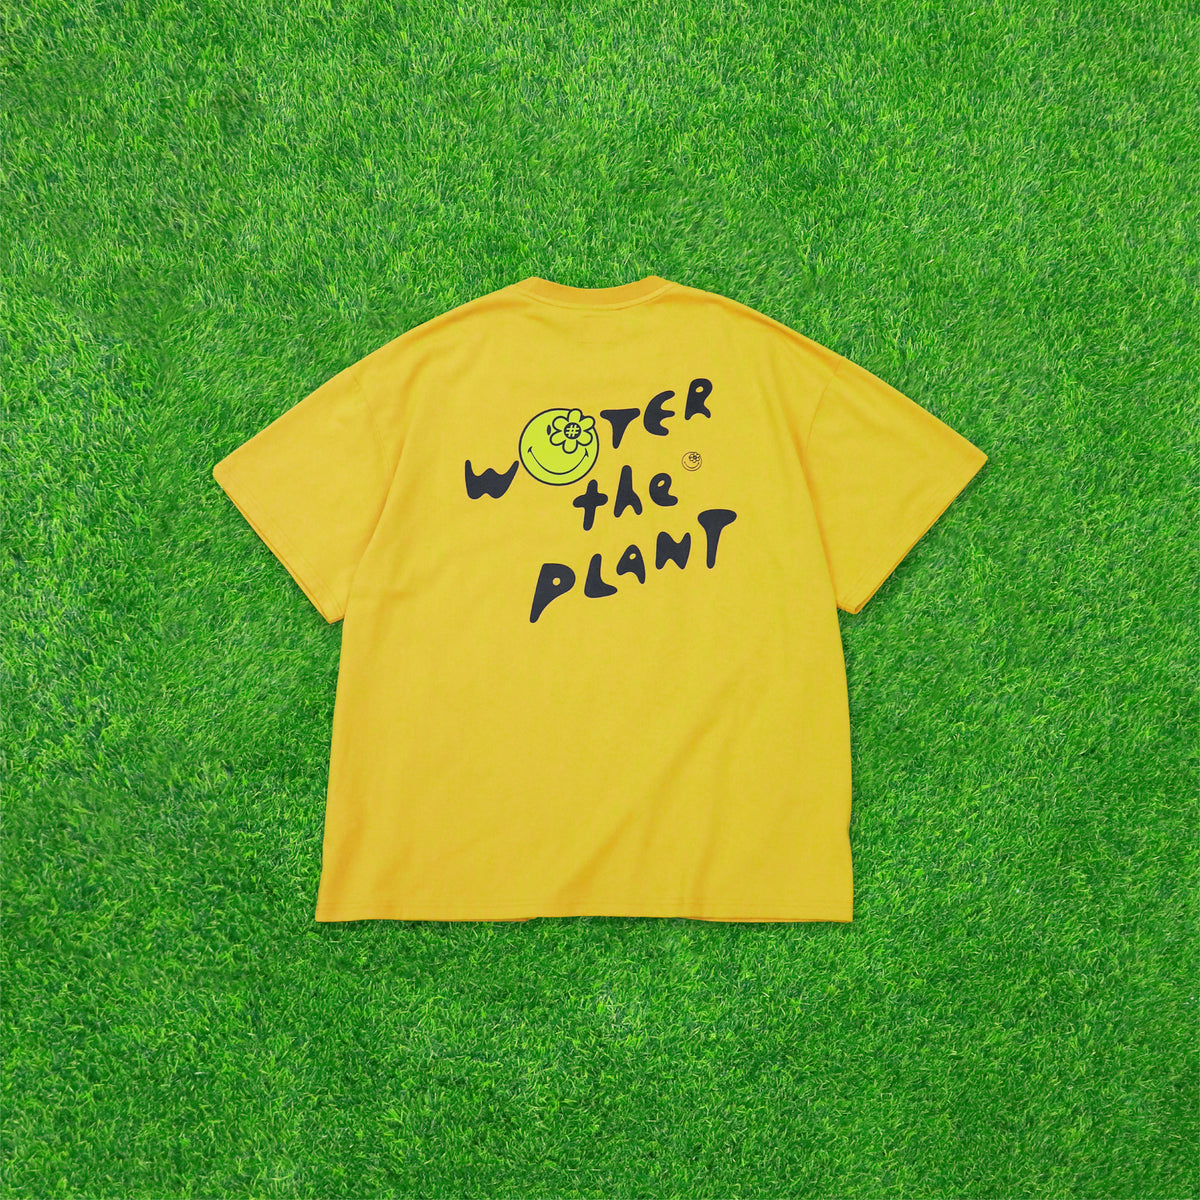 BEAM TSHIRT | ORANGE, Short sleeve, Oversized Fit, Ribbed crewneck, Yellow woven flag logo at the left sleeve, Collaboration with Smiley, Color: Orange, Material: 100% Cotton